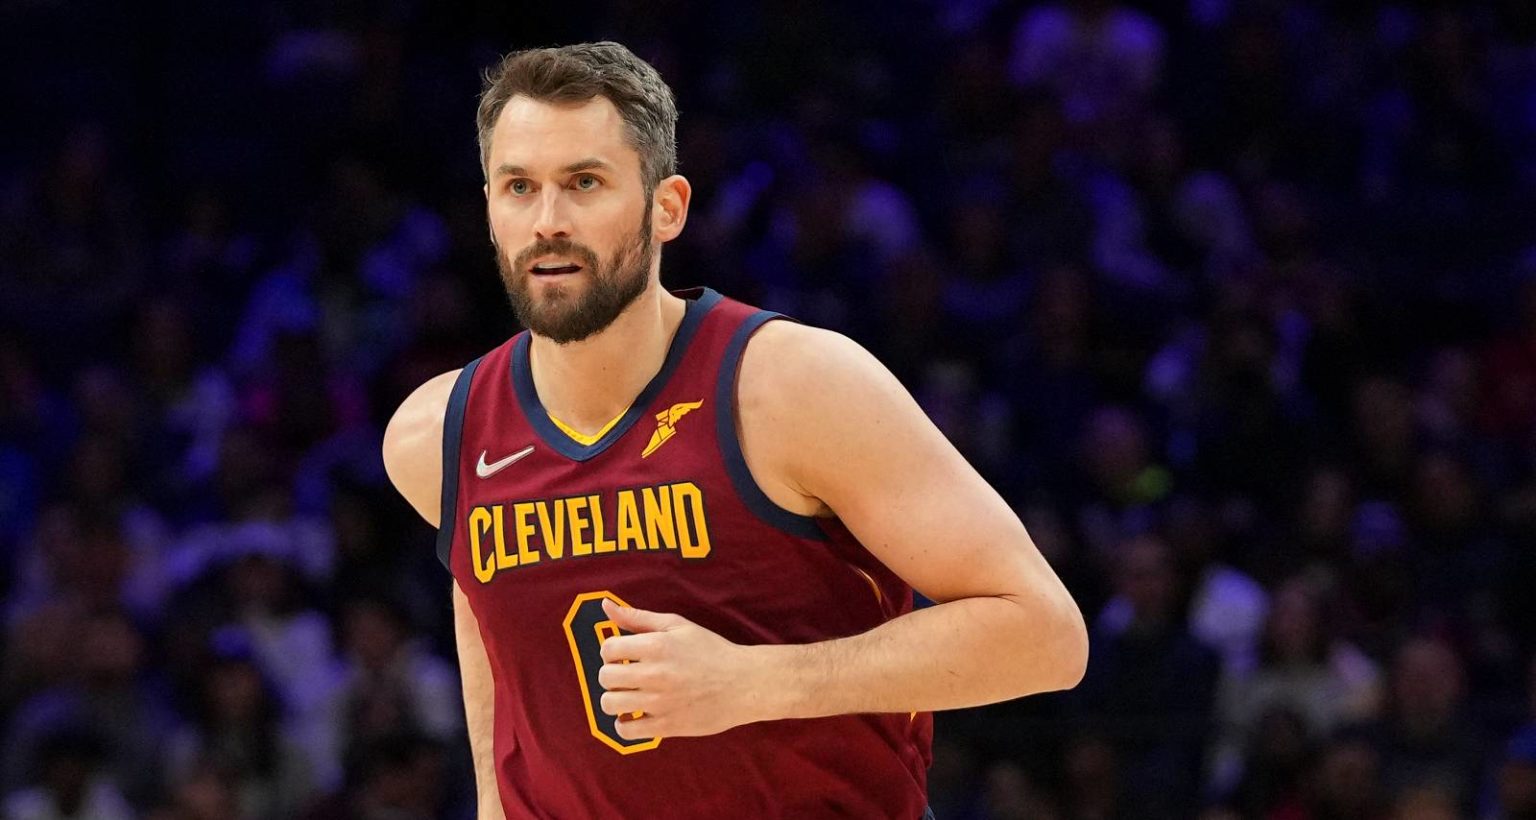 Kevin Love Stats 5 Facts You Need to Know about the Cleveland